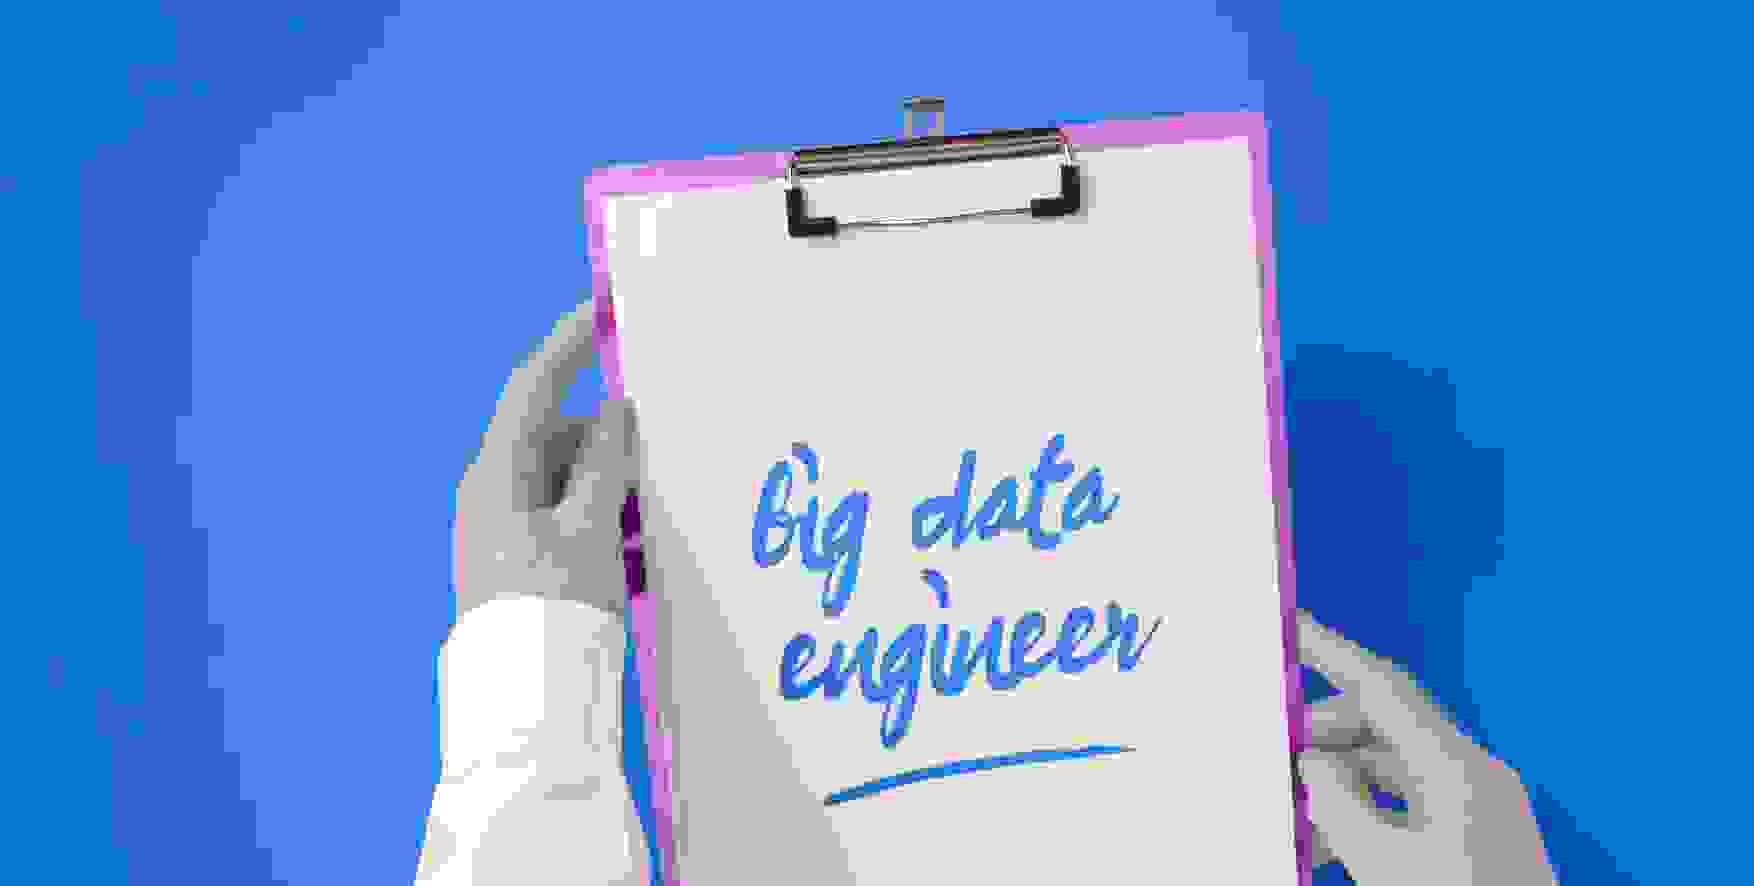 big data engineer written on a piece of paper in a clipboard